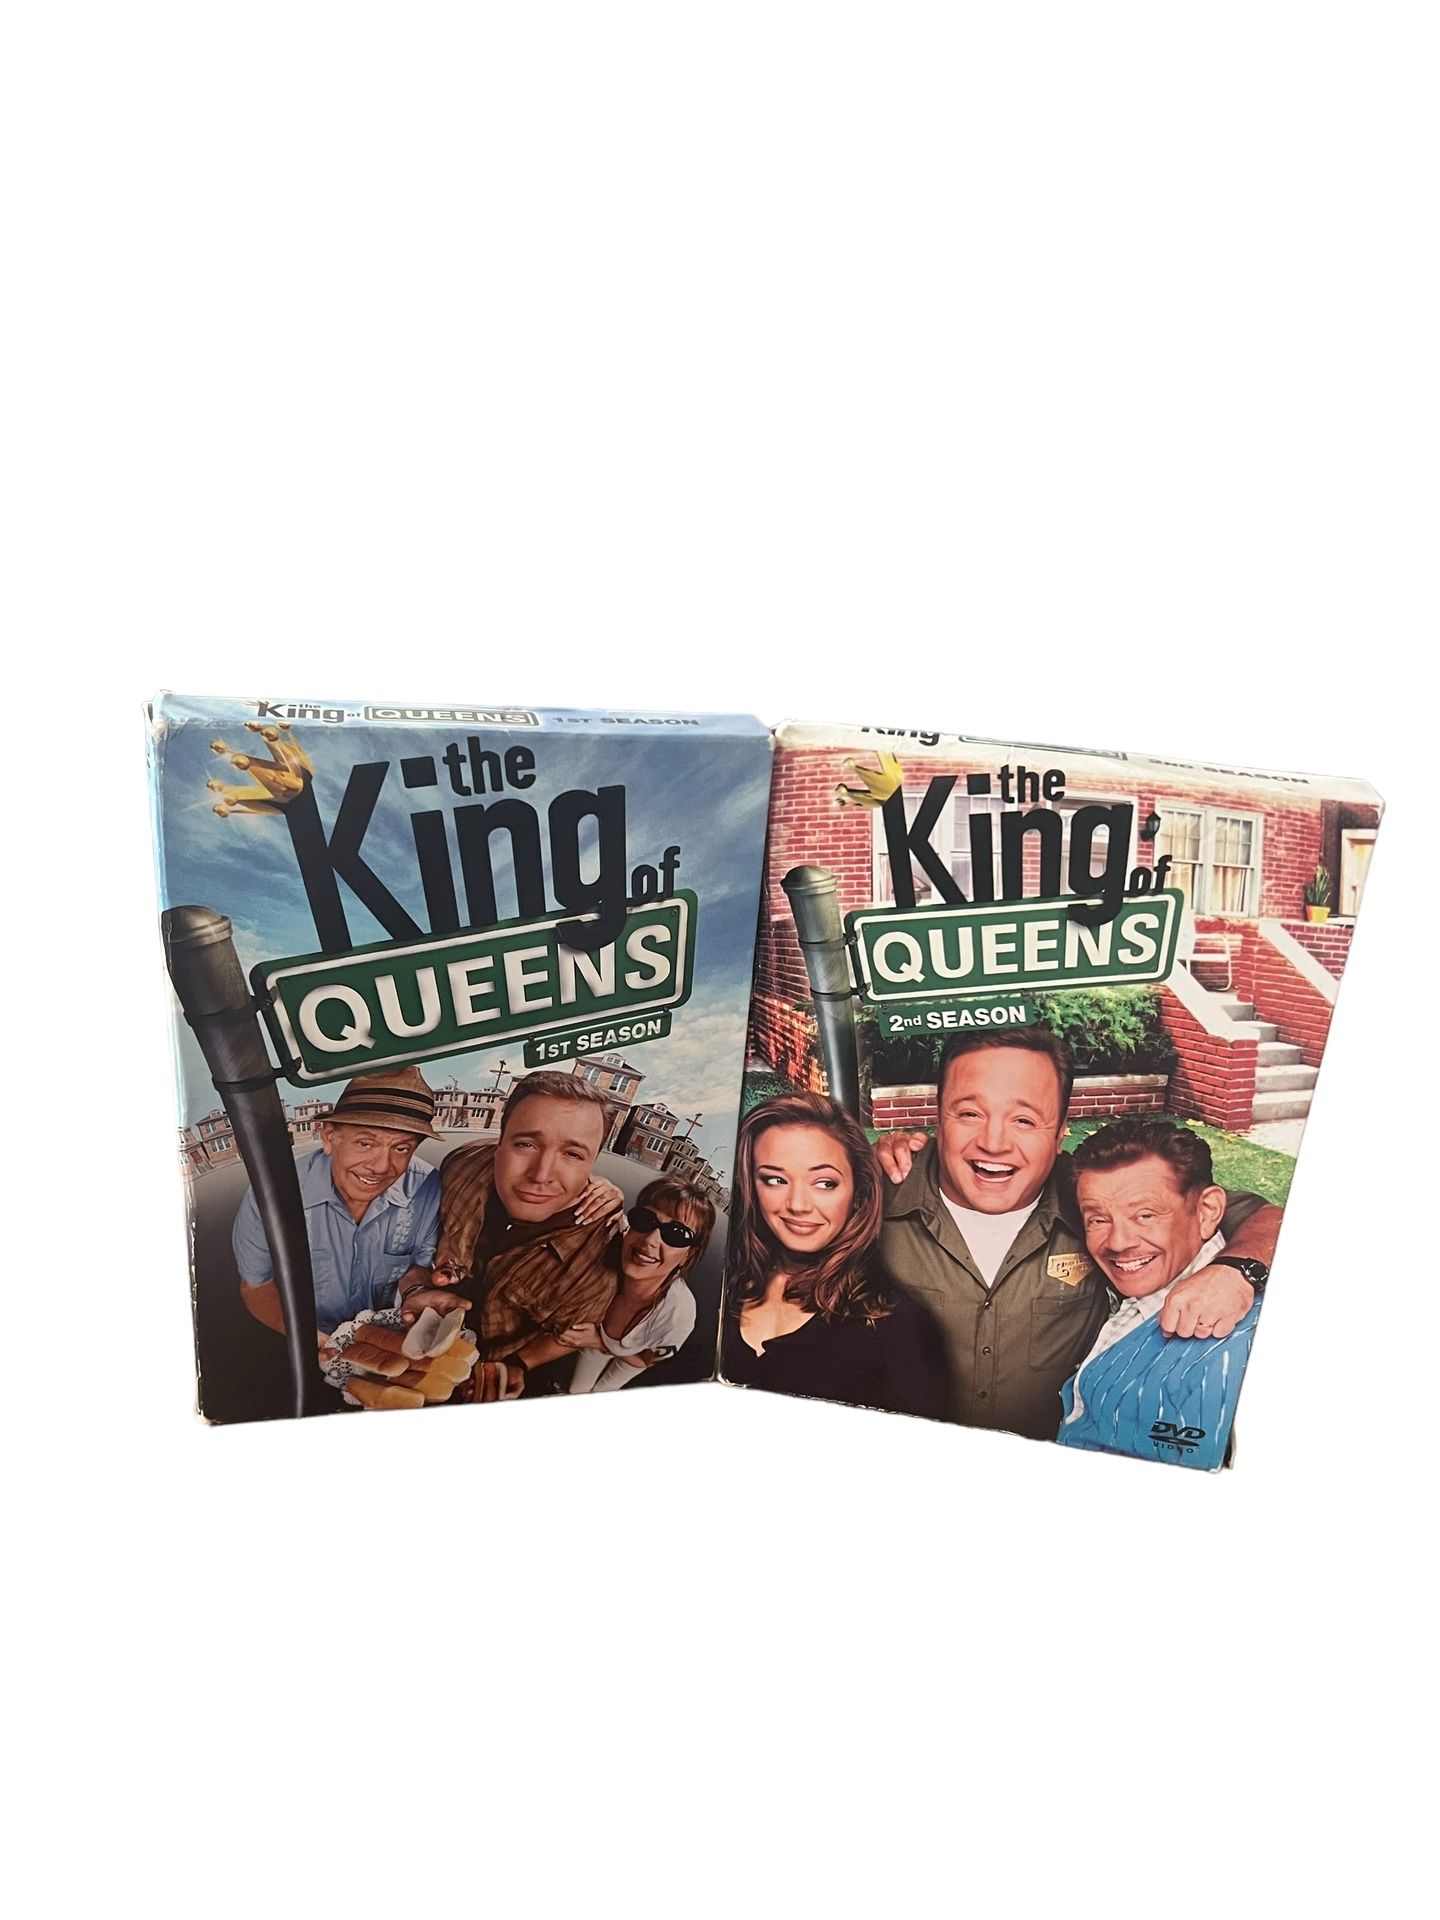  The King of Queens Complete Ist and 2nd Season DVD    This DVD set includes the first and second seasons of The King of Queens, the popular TV show s